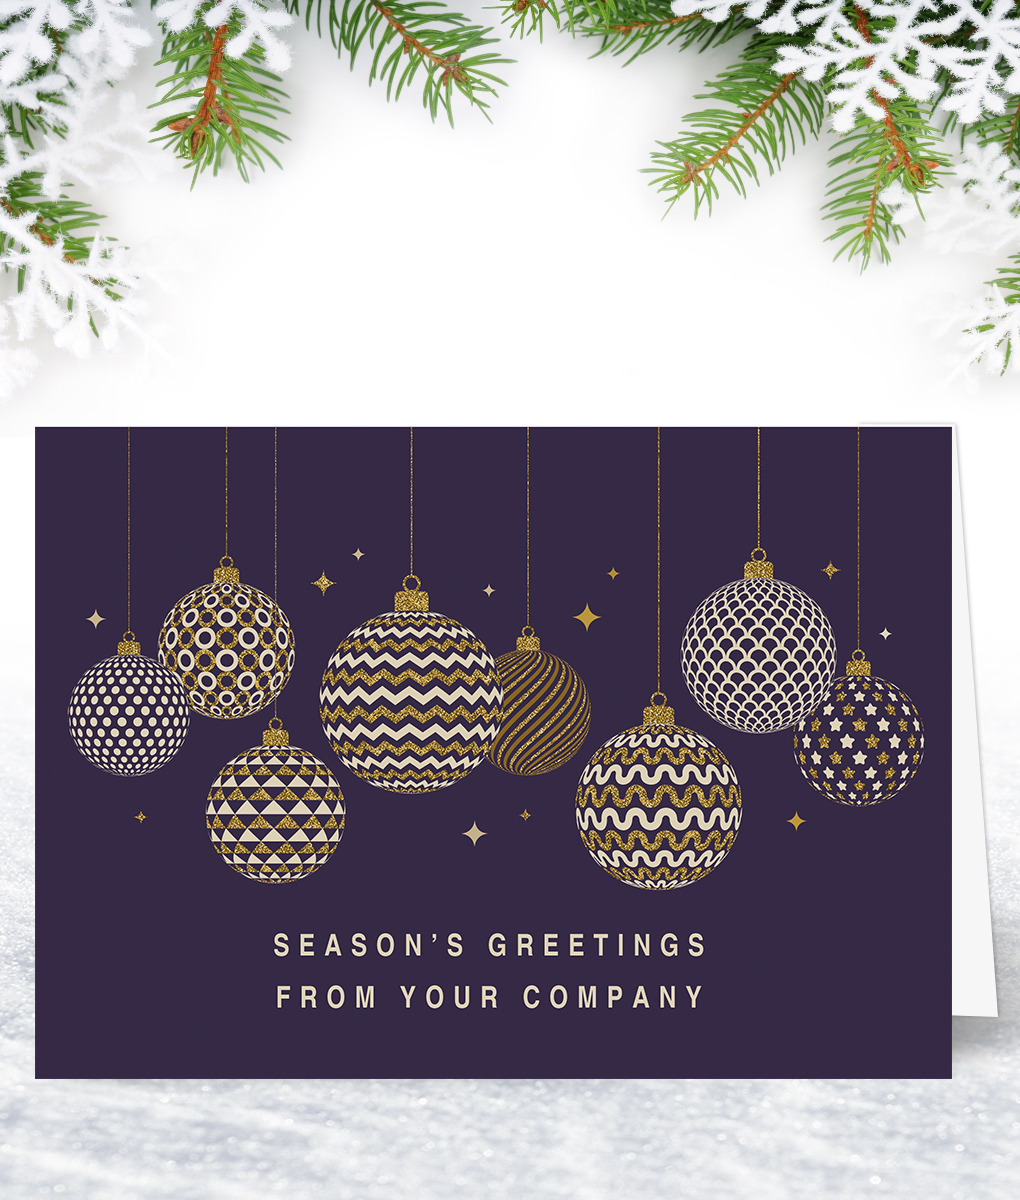 company holiday cards Corporate holiday cards messages and wording ...